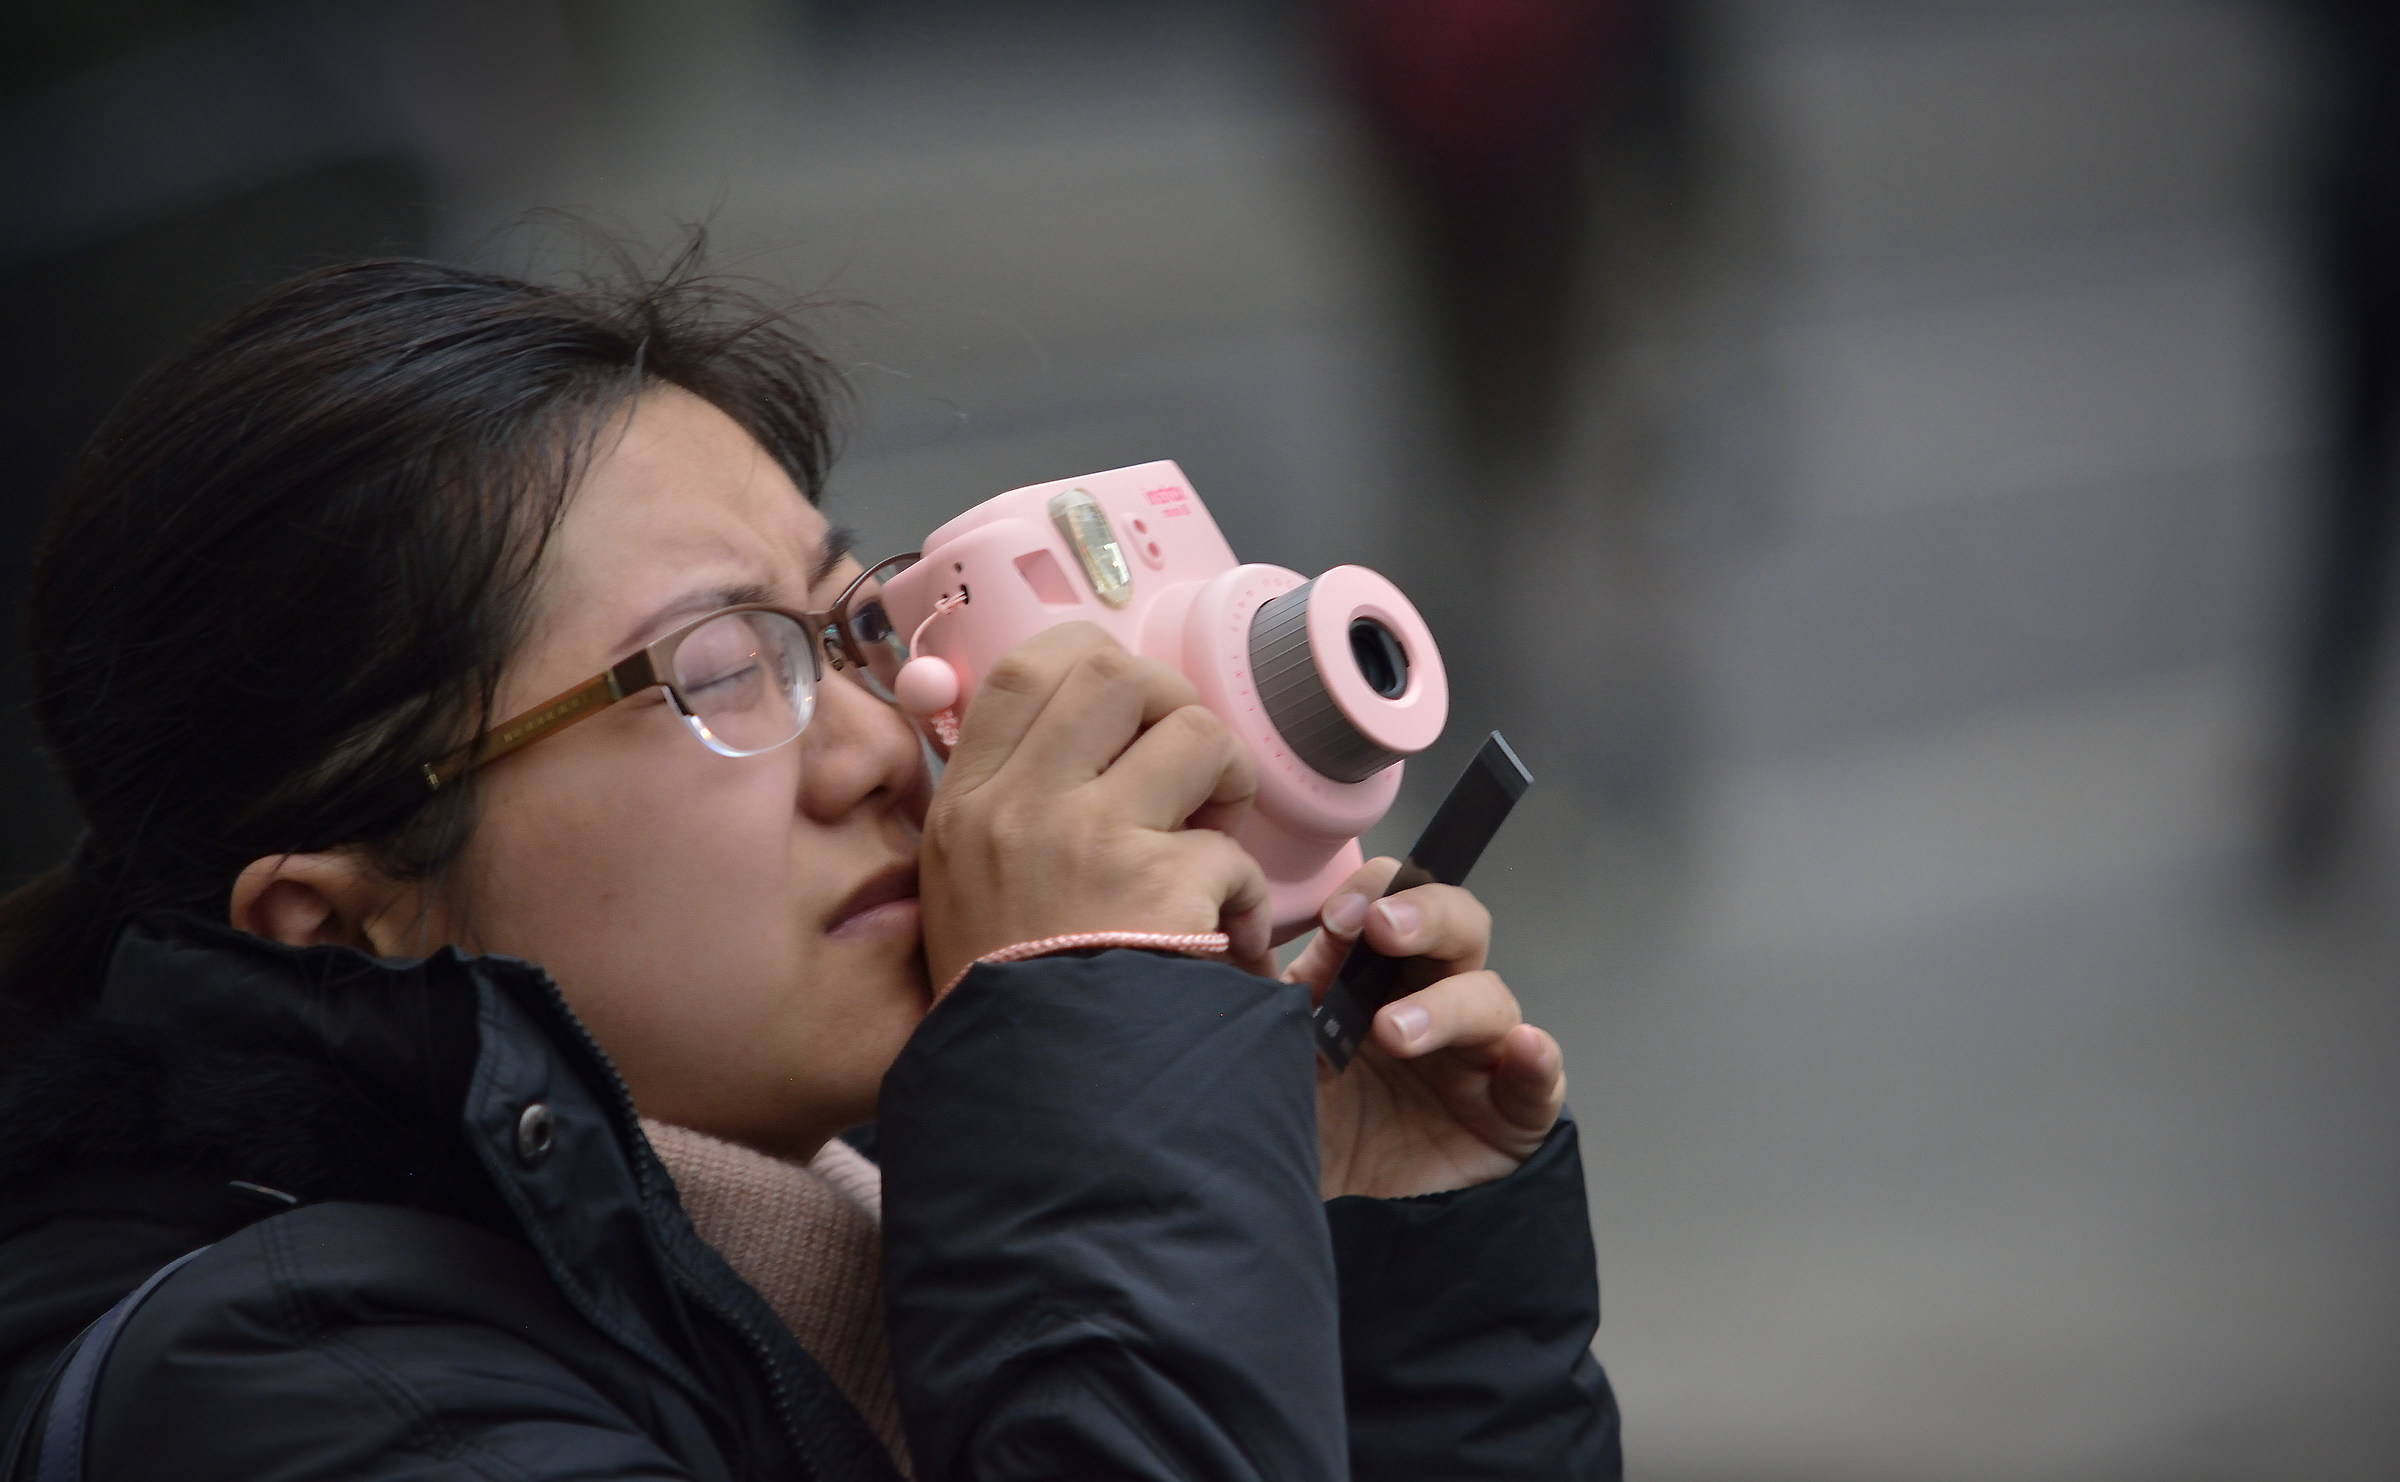 The Girl with the Pink Camera...